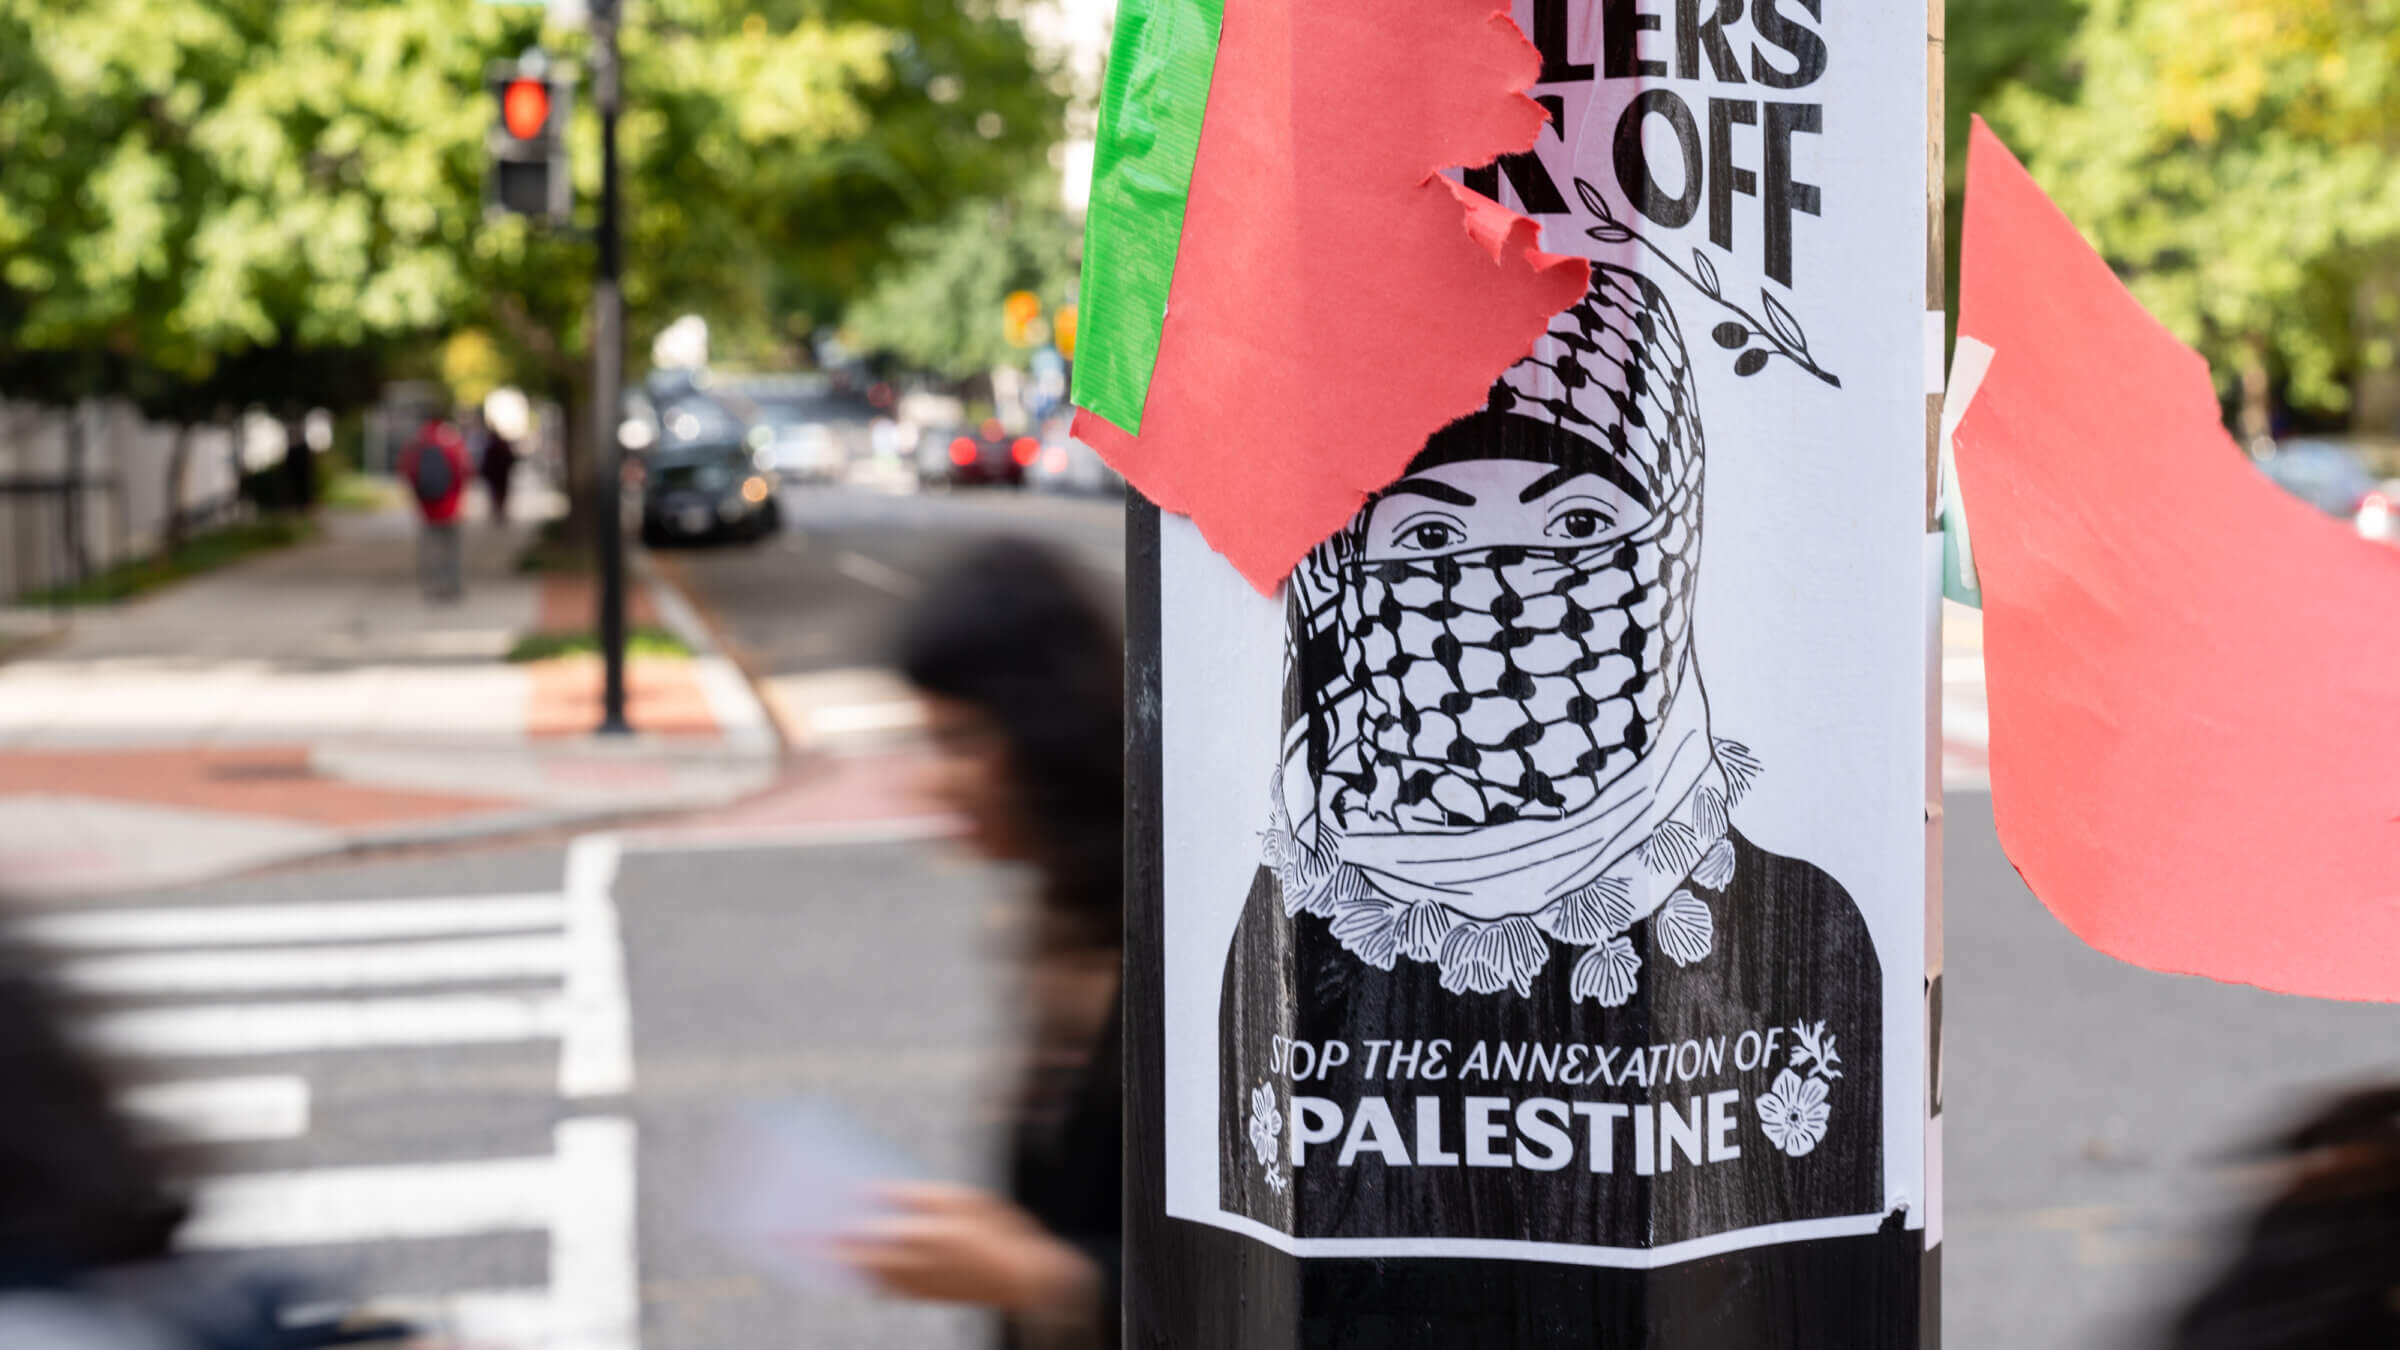 A George Washington University student club and its leader were cleared of wrongdoing Friday for an October incident in which anti-Zionist posters were placed on concrete benches outside the Hillel building. Others were placed on lampposts, including the one pictured above.